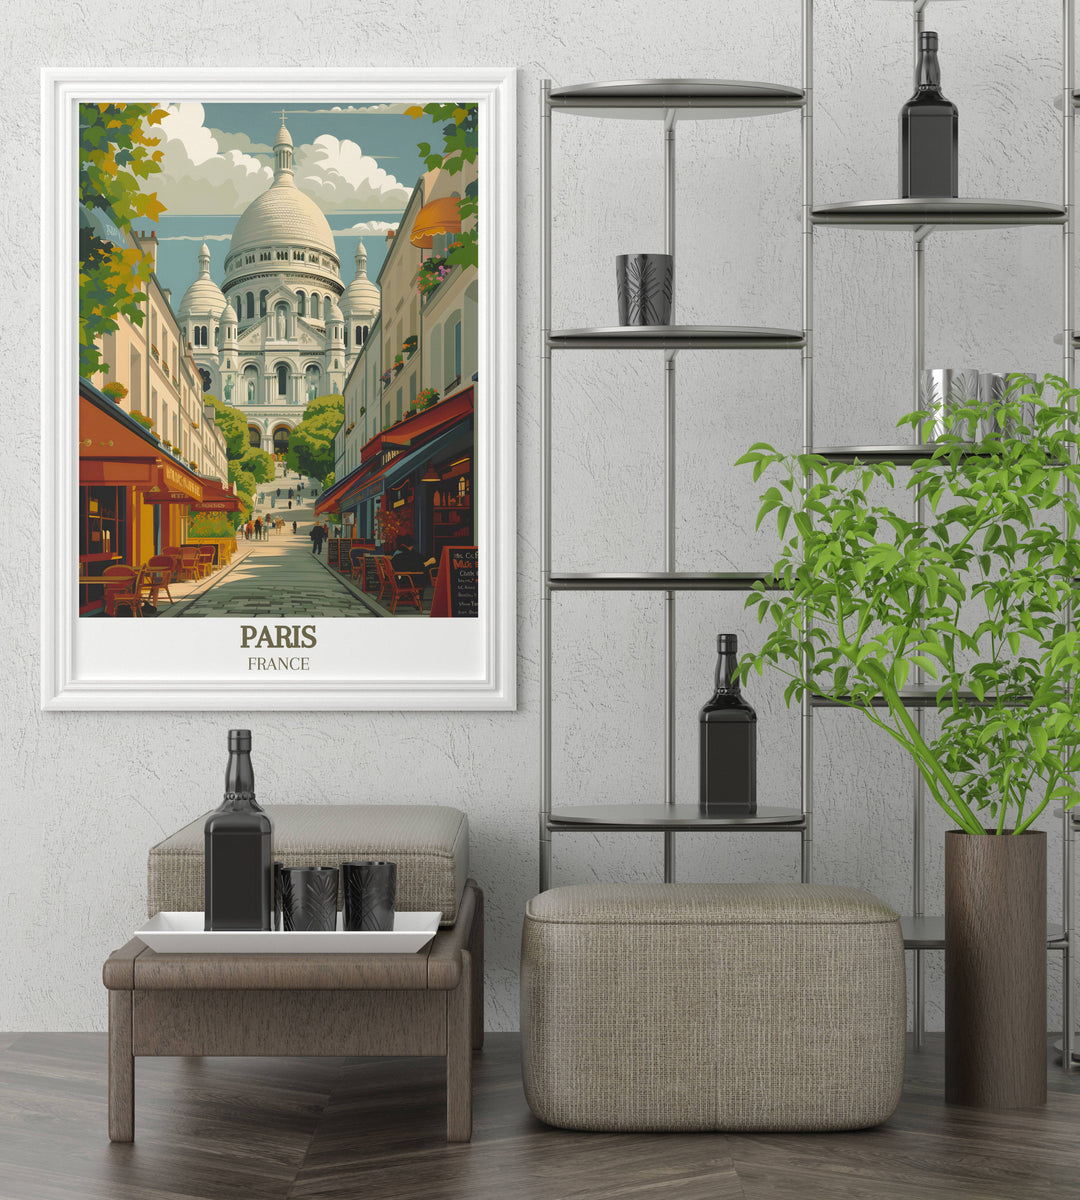 Framed prints of Montmartres historic landmarks, including the Sacré Cœur Basilica and the Moulin Rouge, capturing the timeless beauty of this iconic Parisian district.